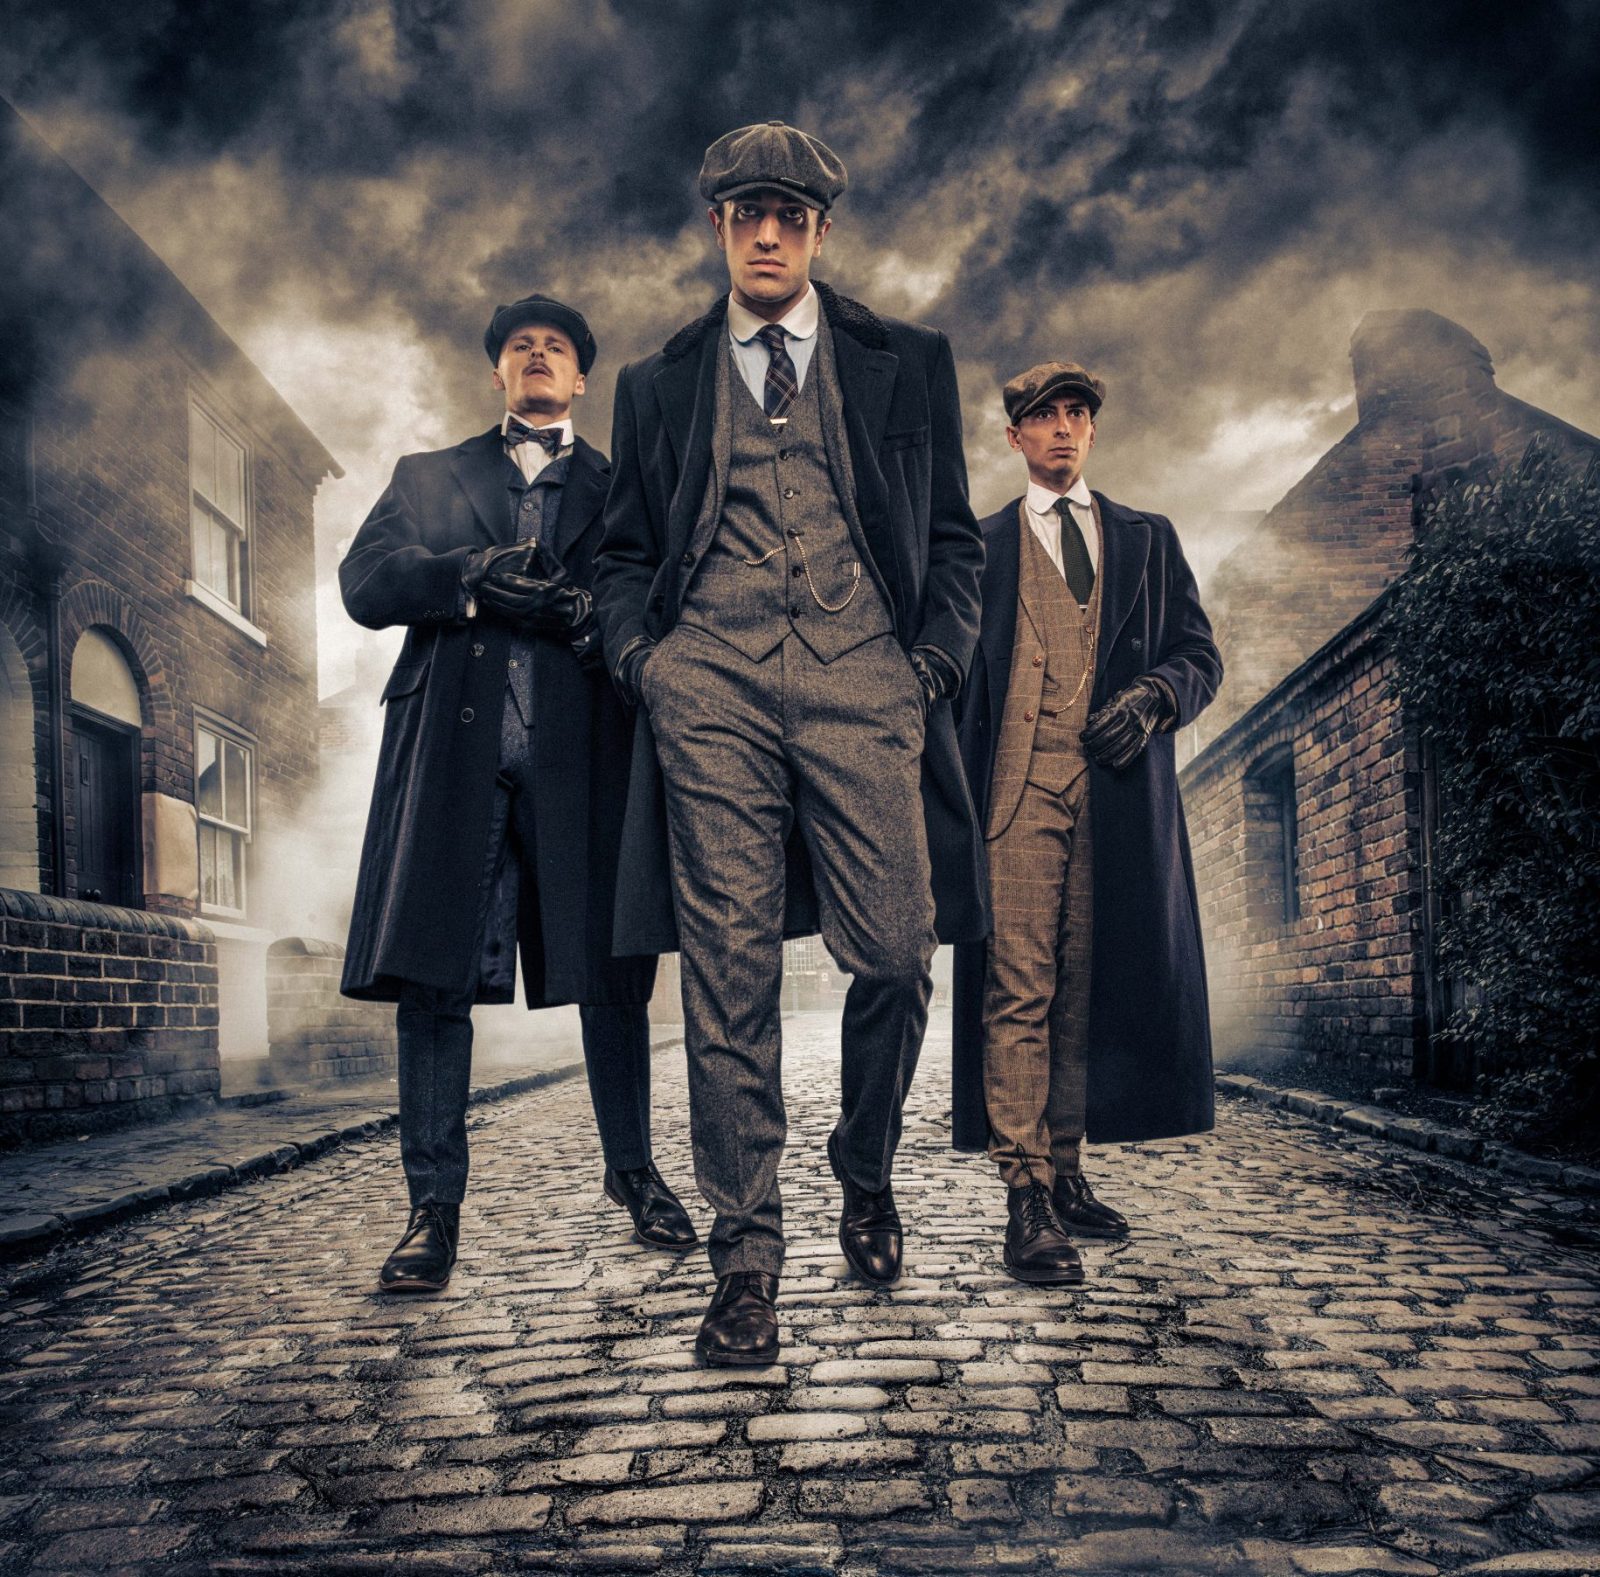 A Peaky Blinders-inspired theater show is heading to The Lowry next year, The Manc